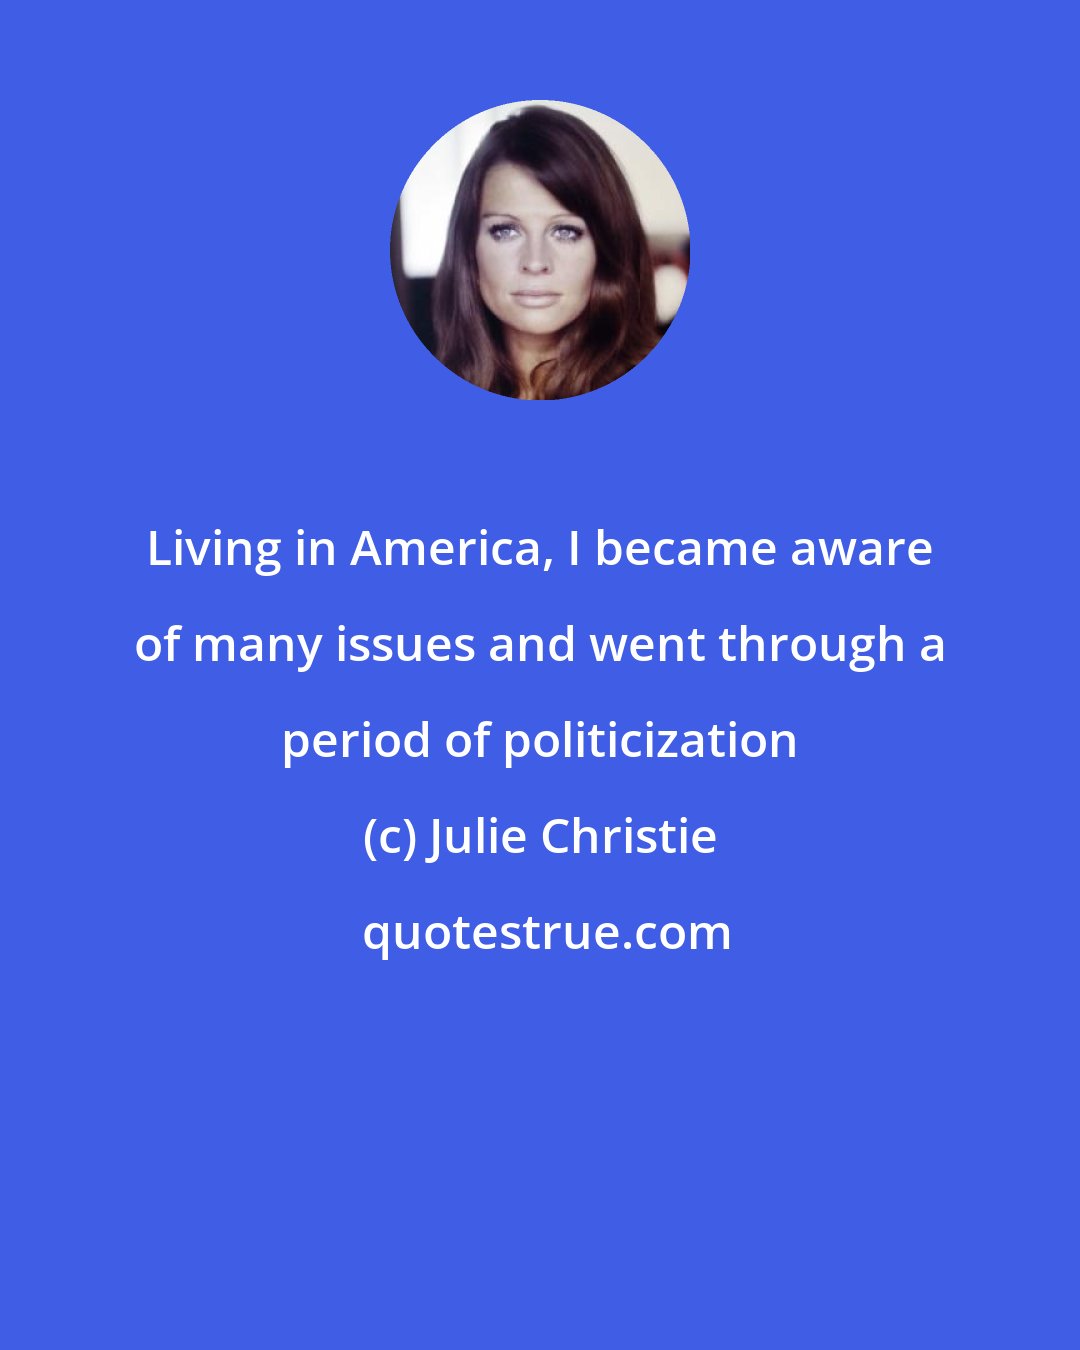 Julie Christie: Living in America, I became aware of many issues and went through a period of politicization